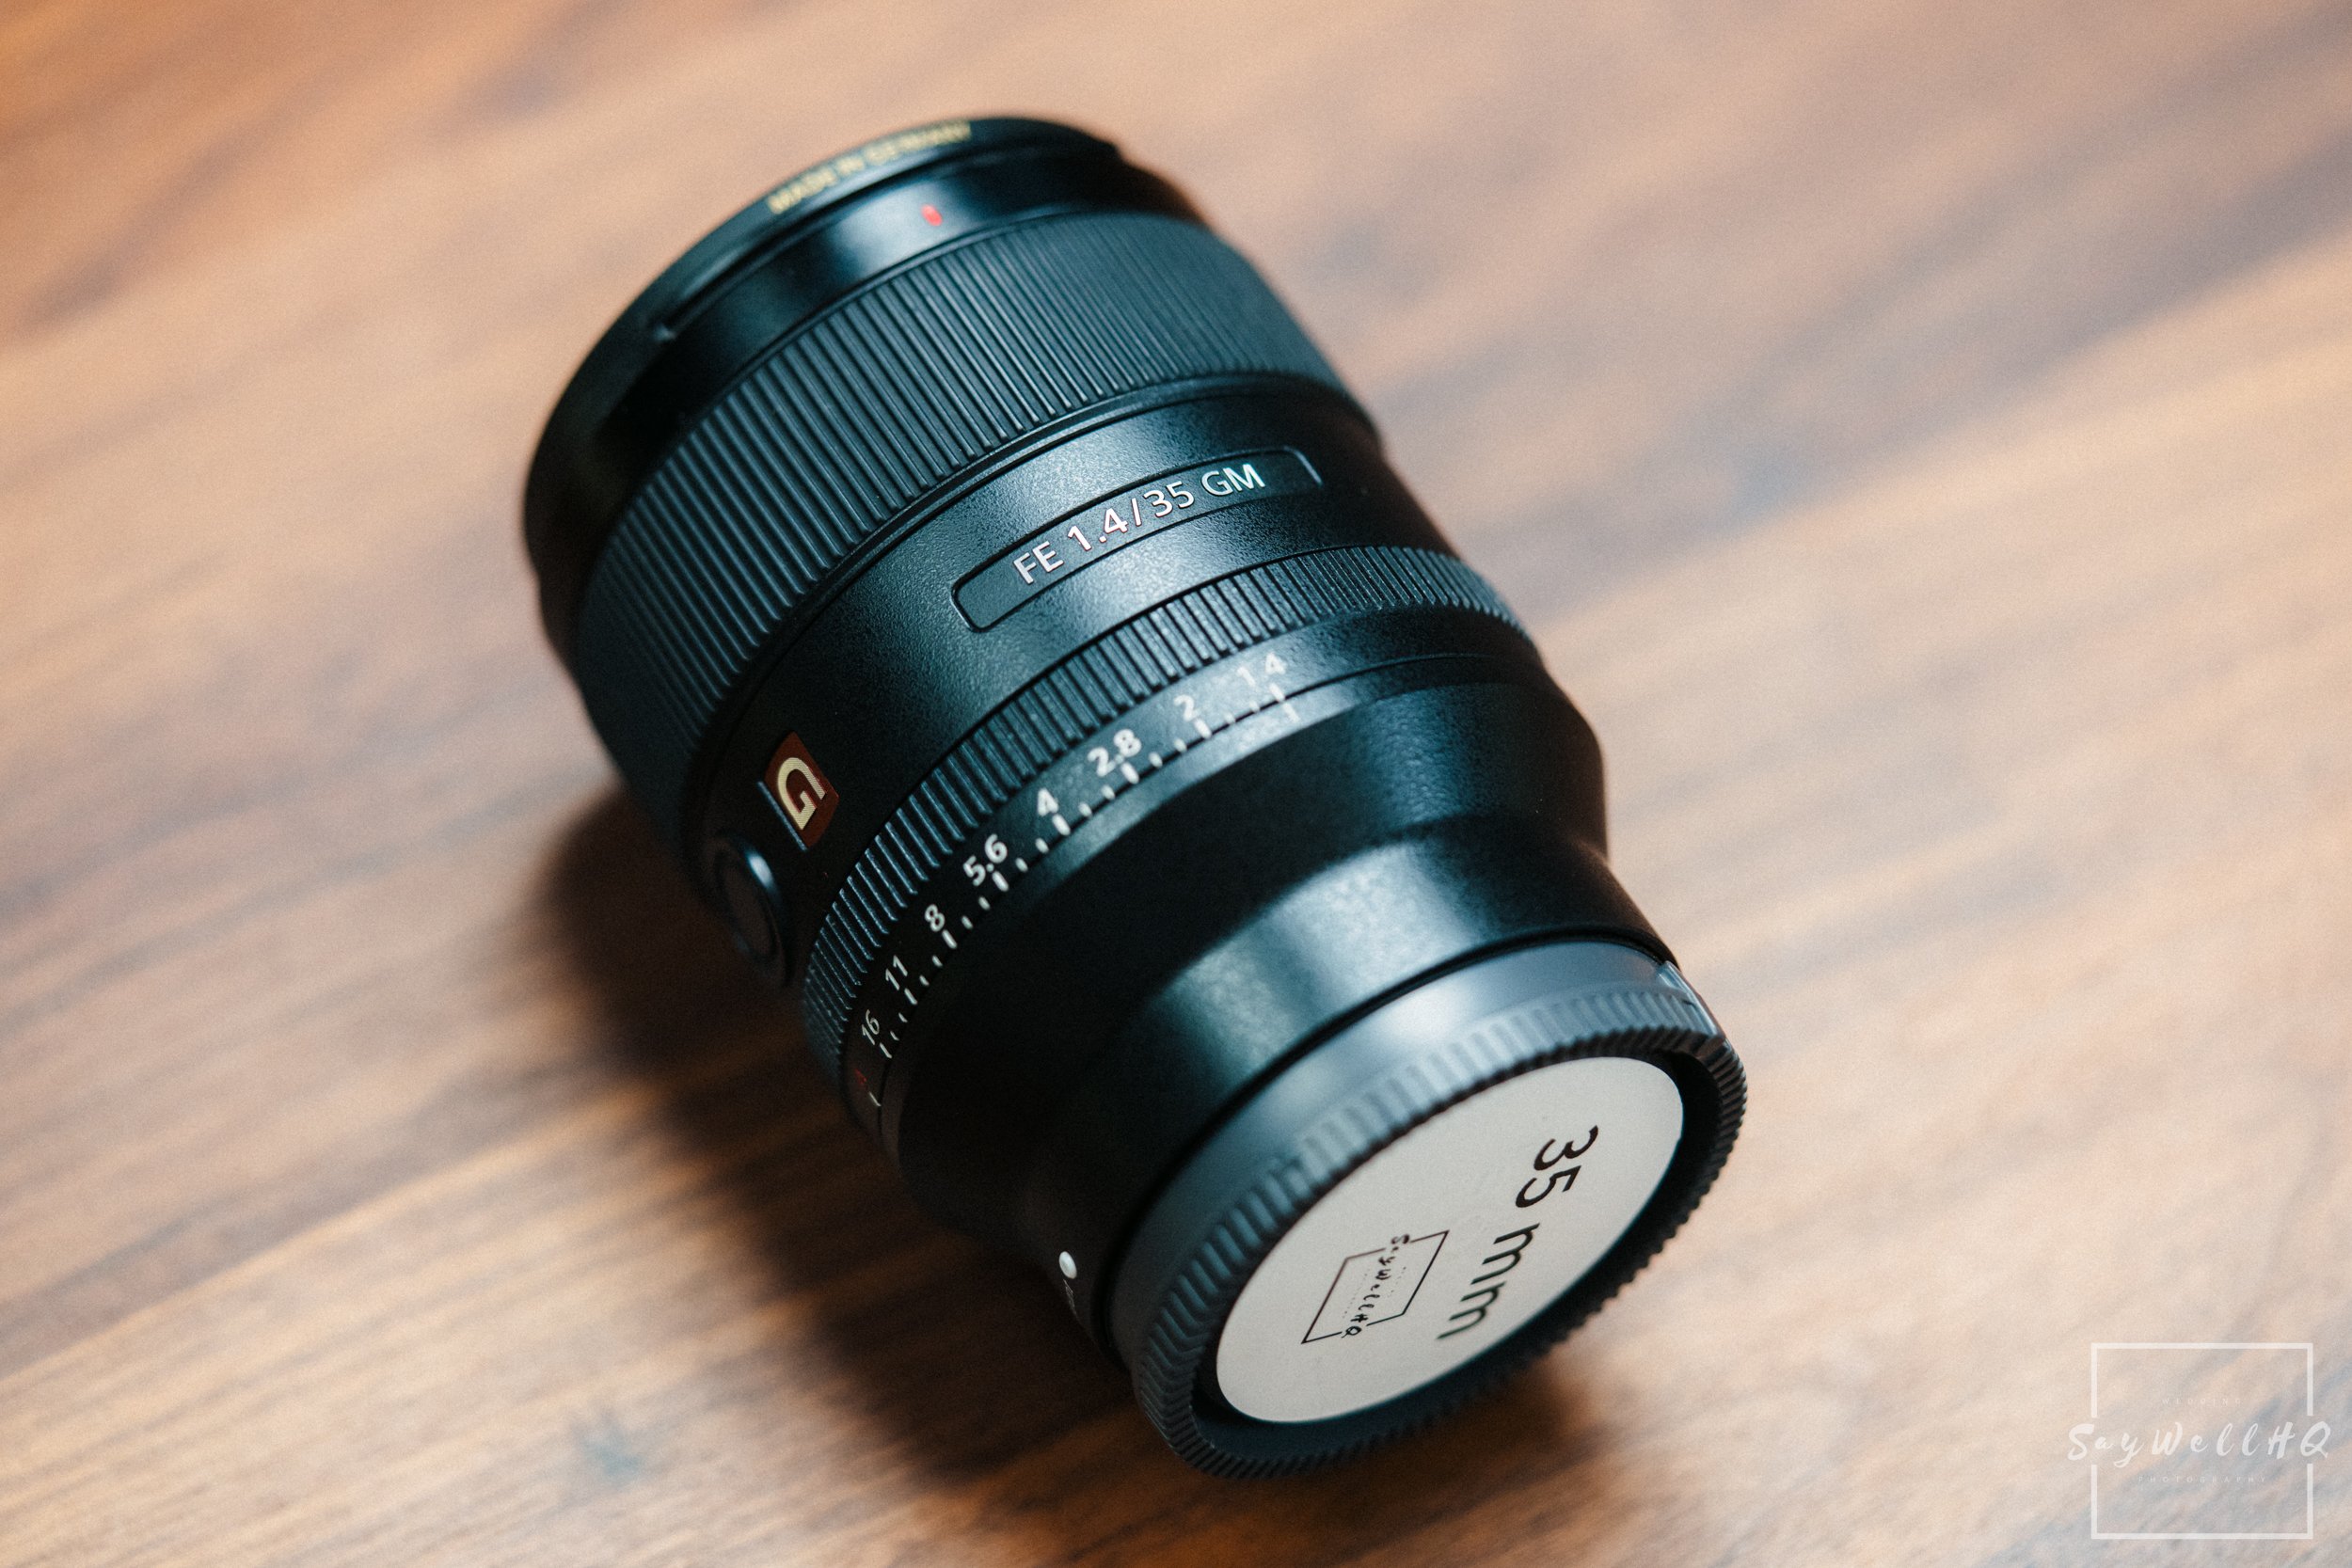 Sony Alpha 35mm F 1.4 GM Lens for wedding photography | Image of the lens